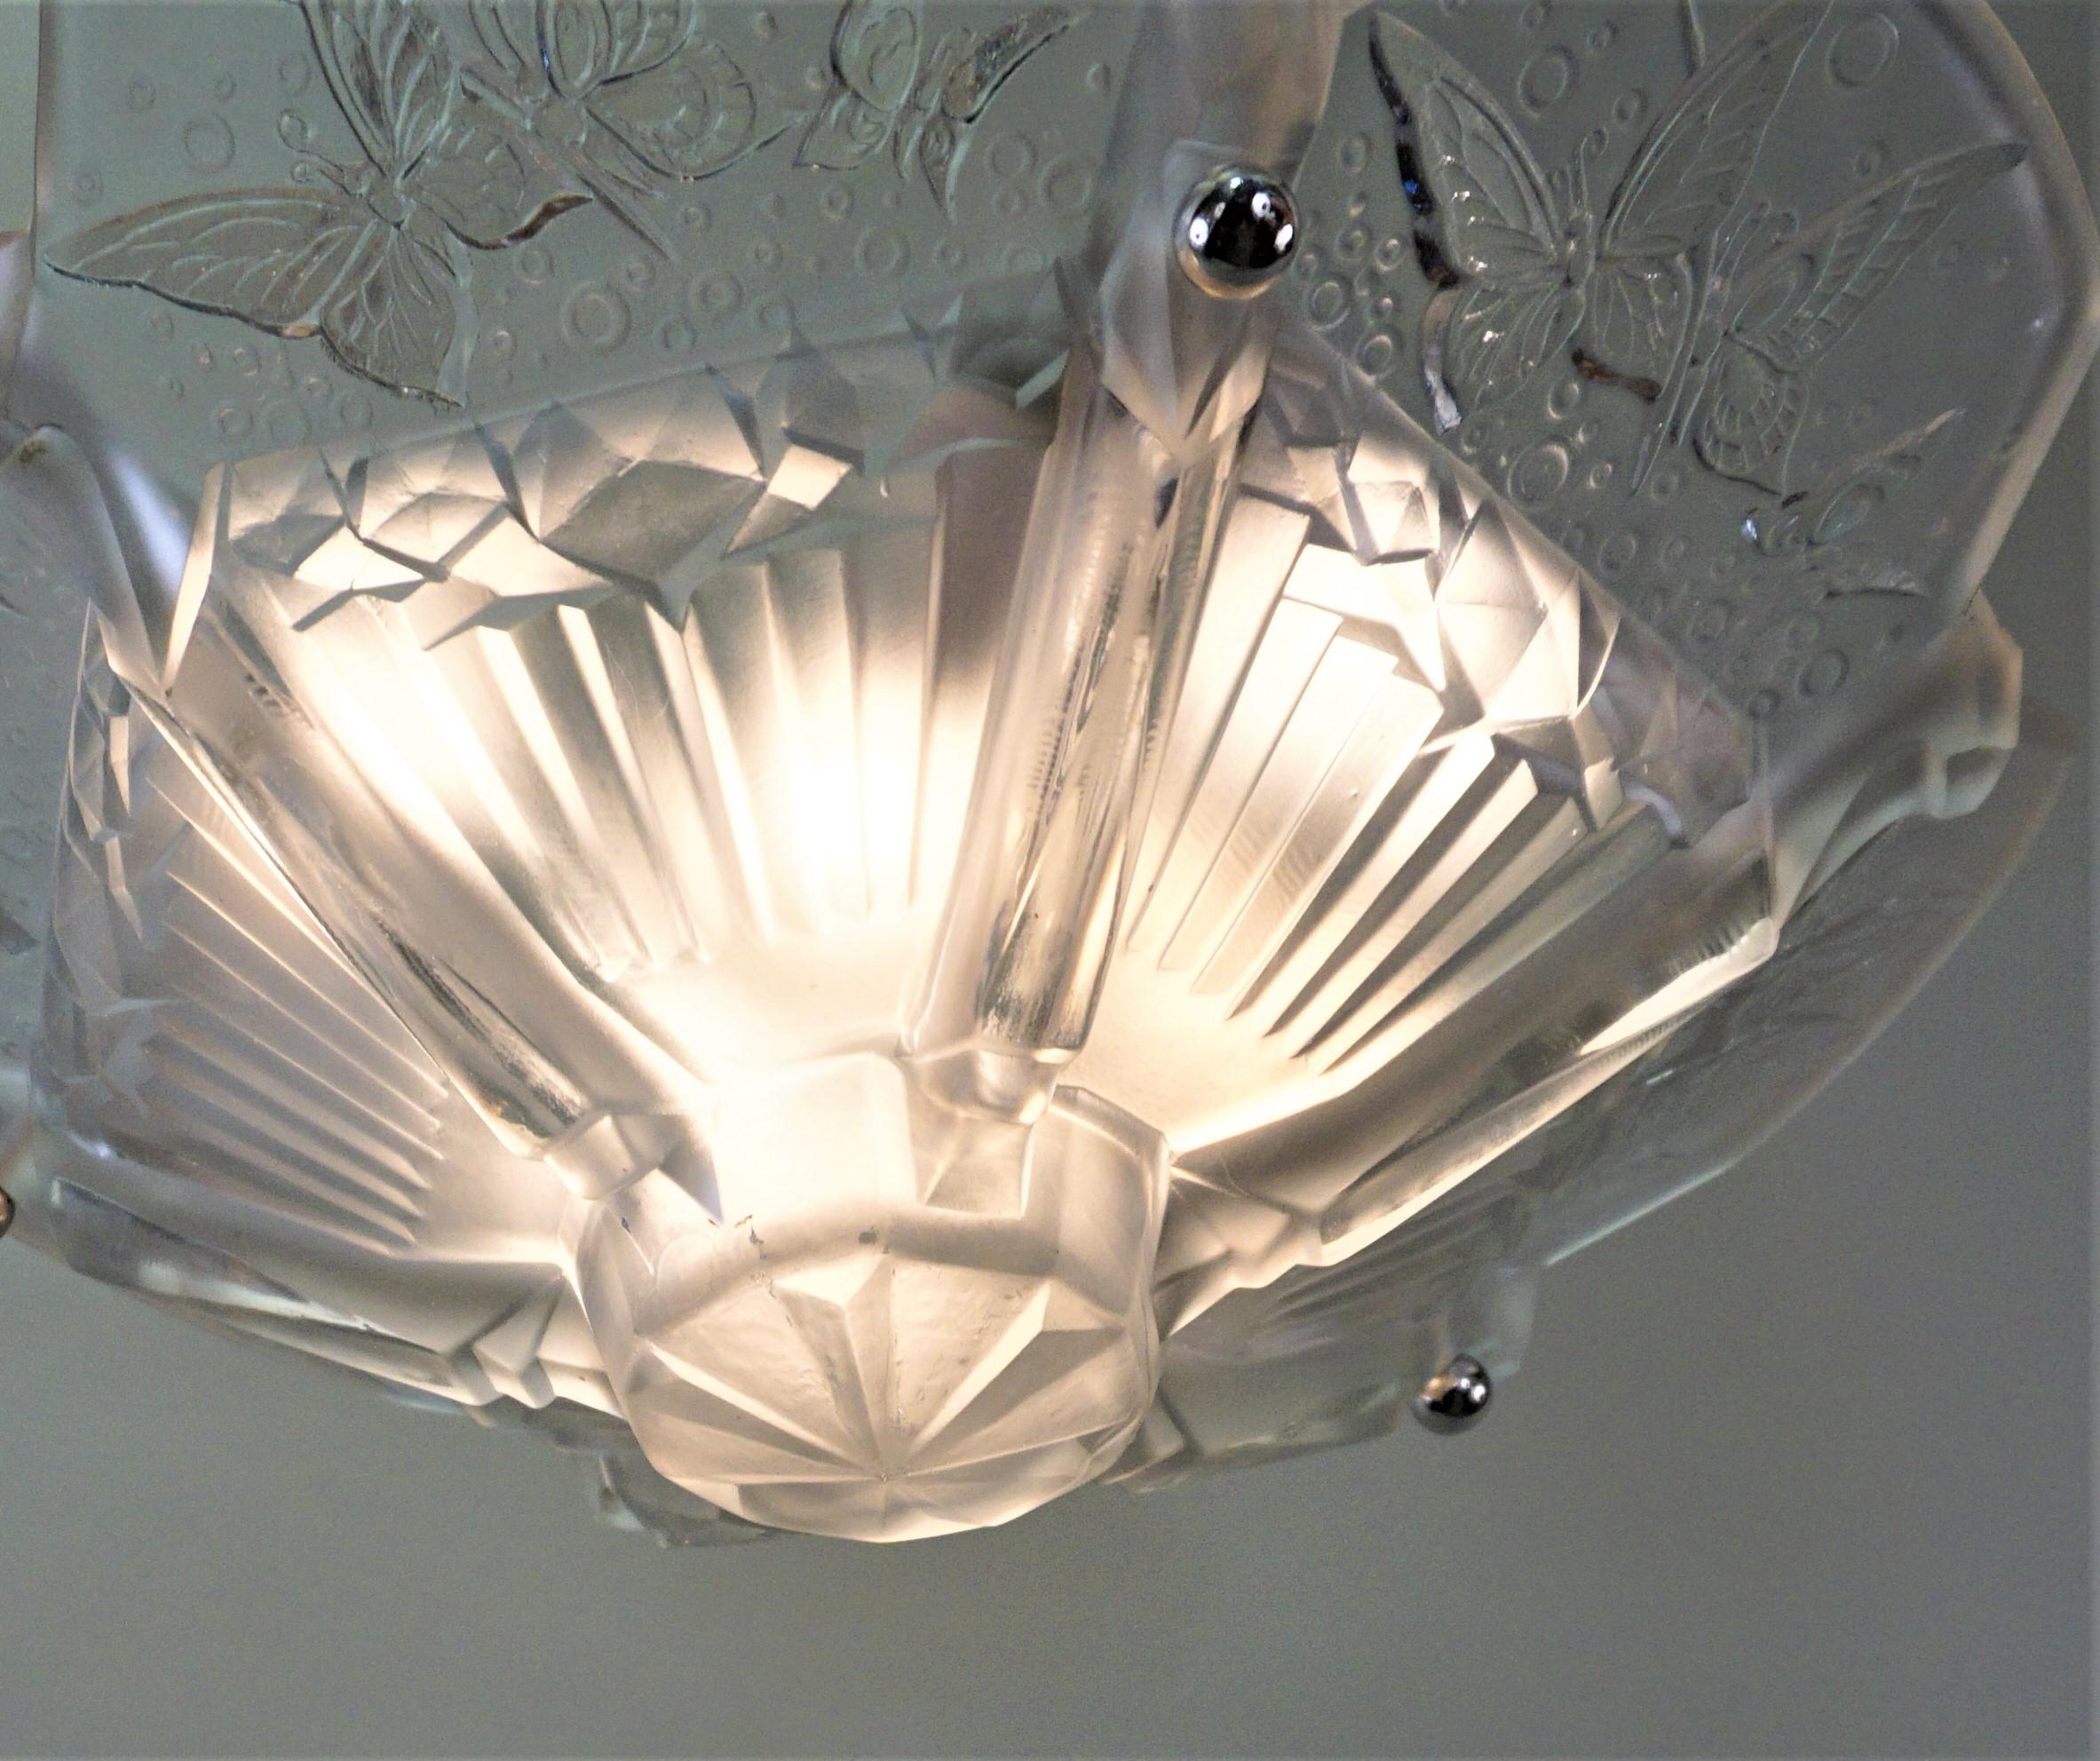 Beautiful butterfly design glass in clear frost glass and nickel on bronze hardware.
Six light 60 watt max each.